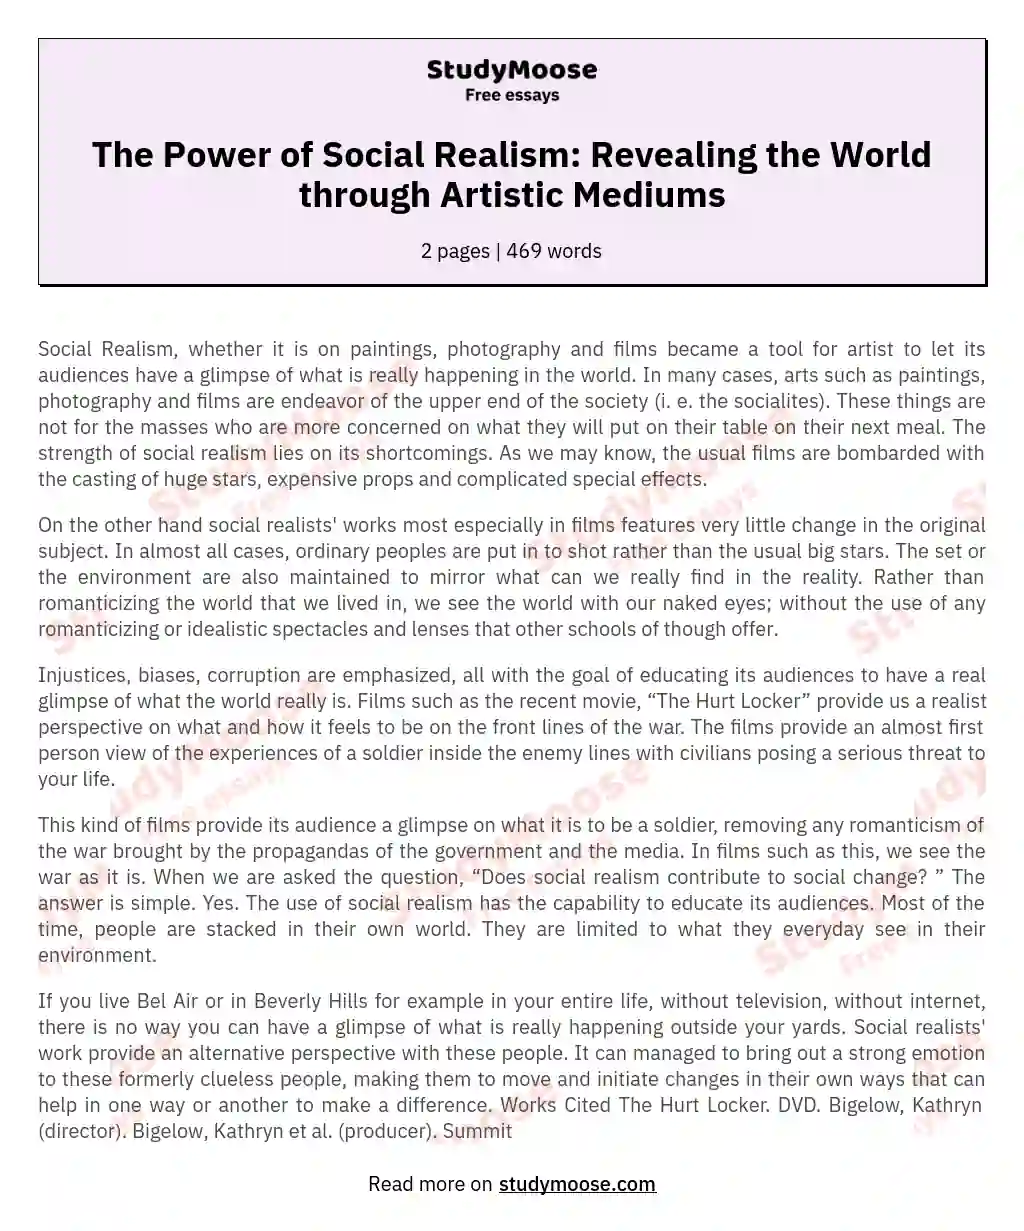 The Power of Social Realism: Revealing the World through Artistic Mediums essay